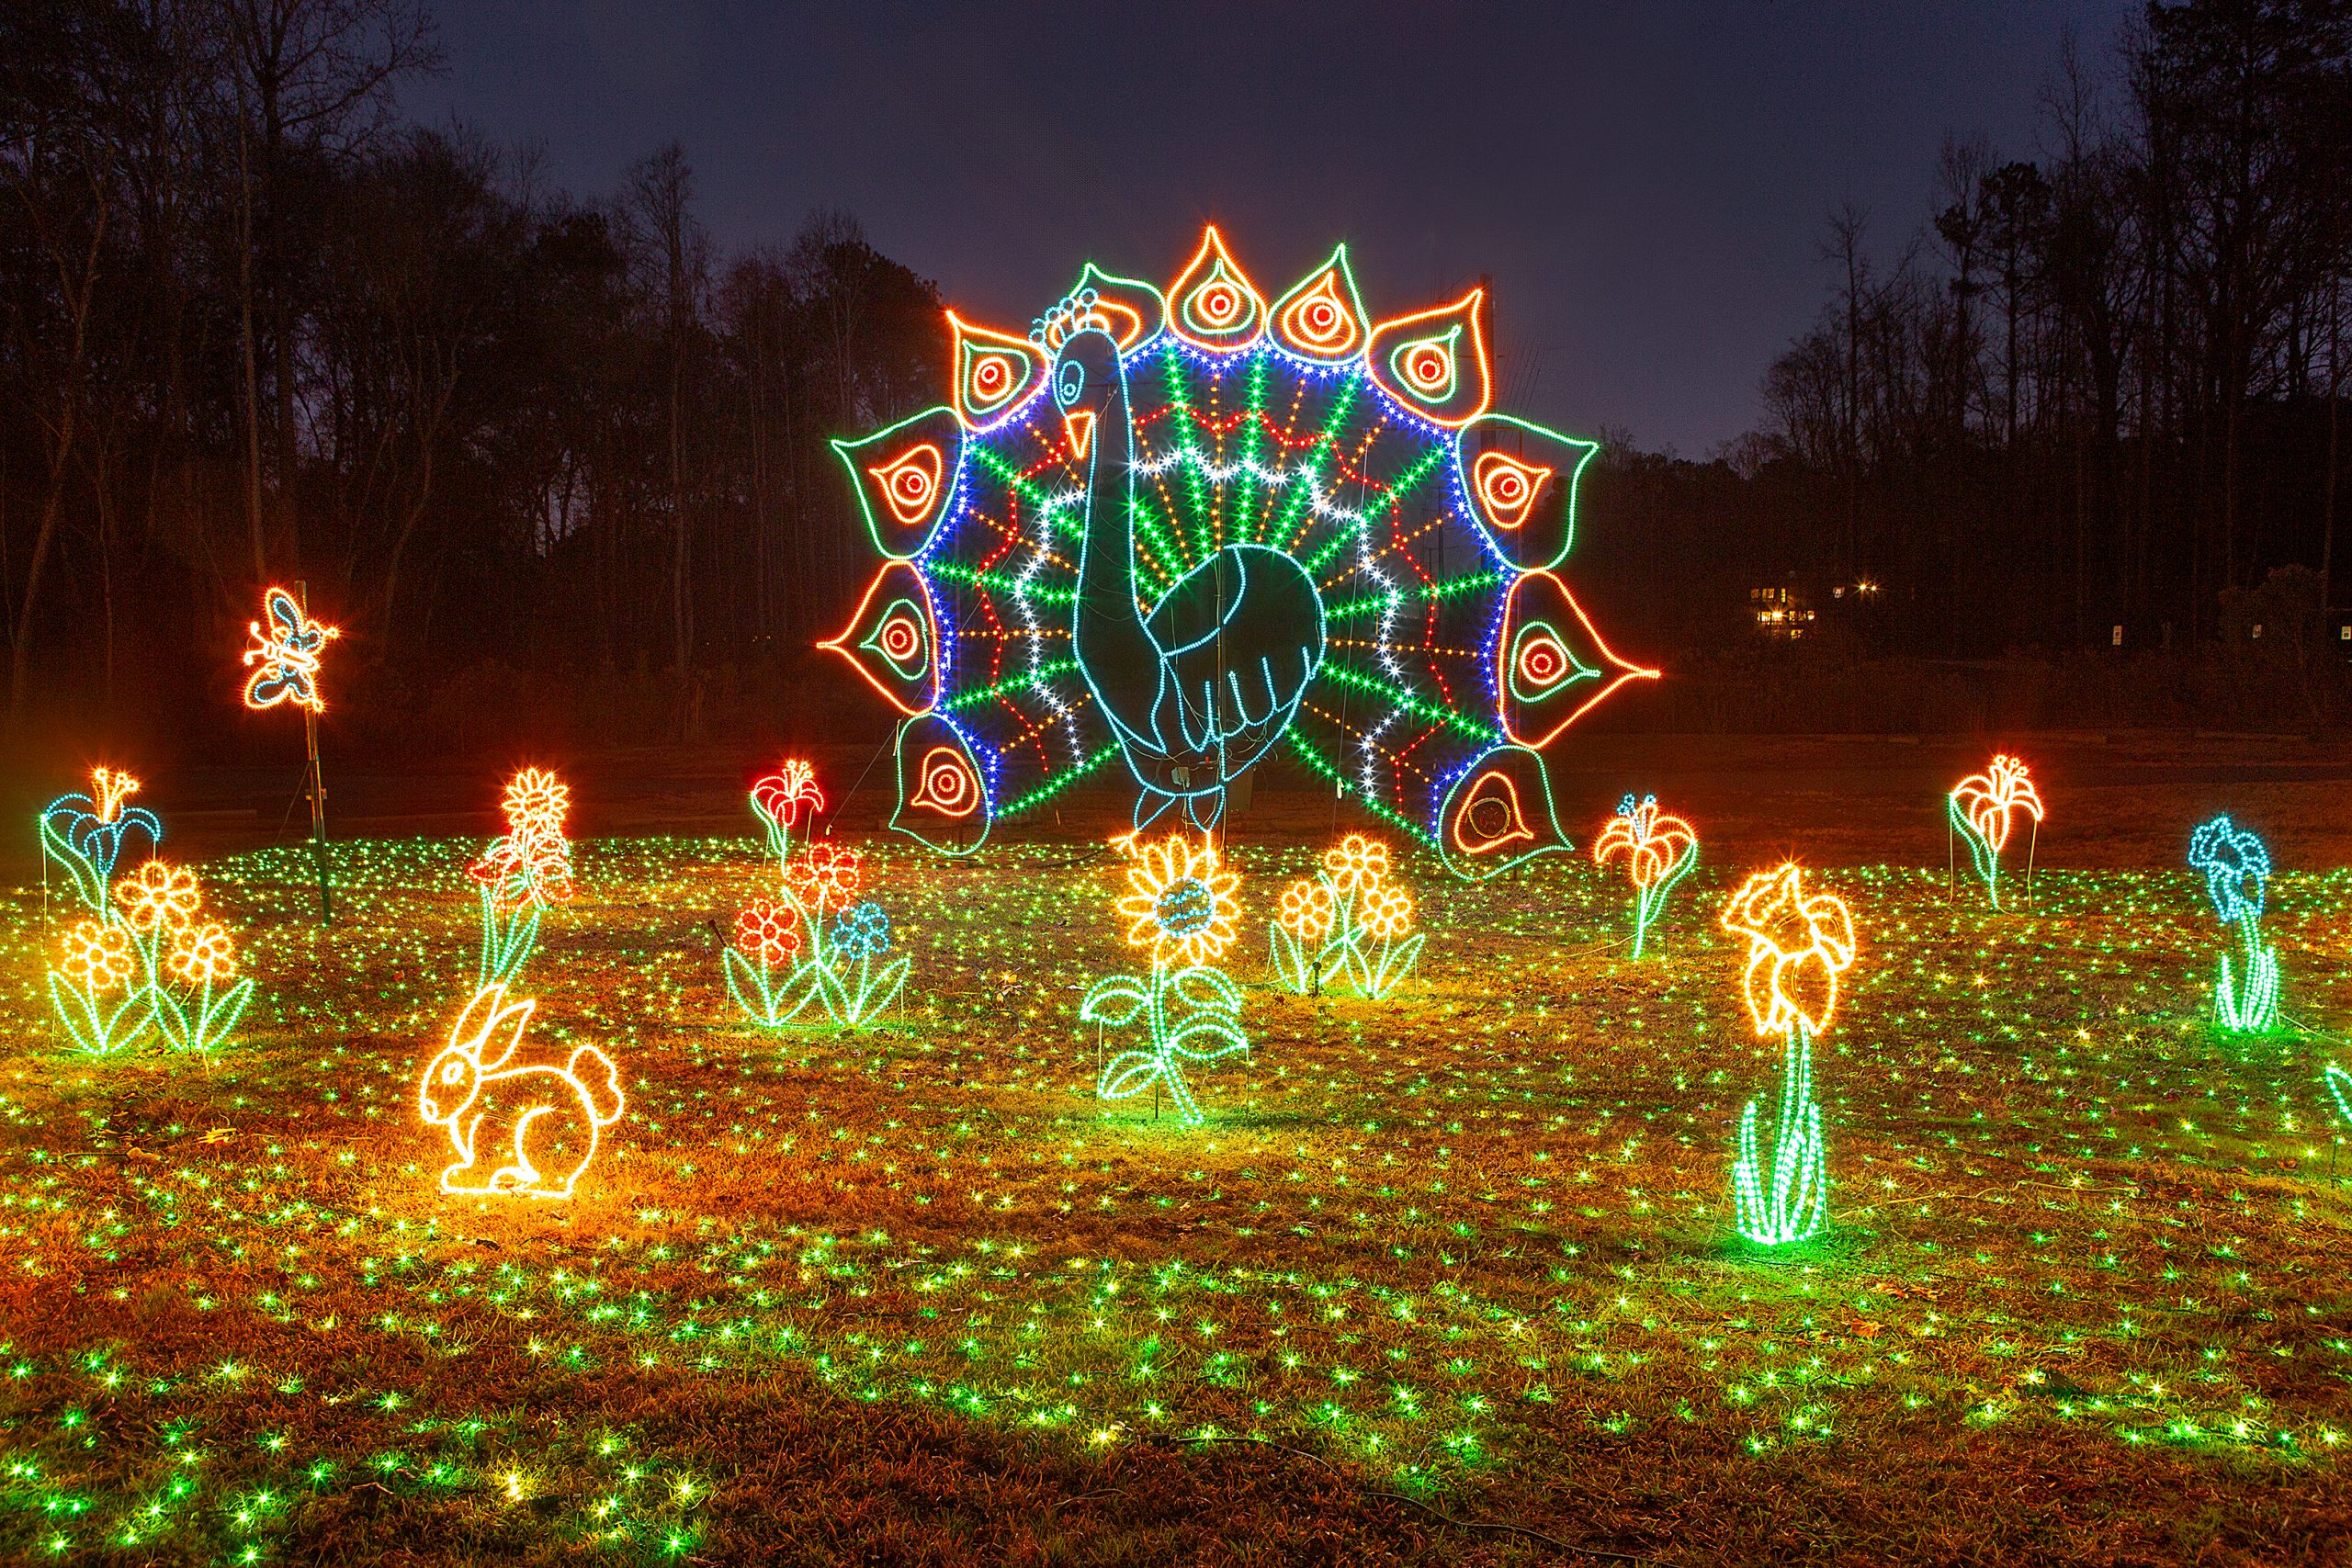 Millions of twinkling lights uplift the spirit at the annual Saluda Shoals Park Holiday Lights. A 2-mile journey of lights, lasers, and music delights “kids” of all ages. Park employees start production of the magical process immediately after Labor Day.